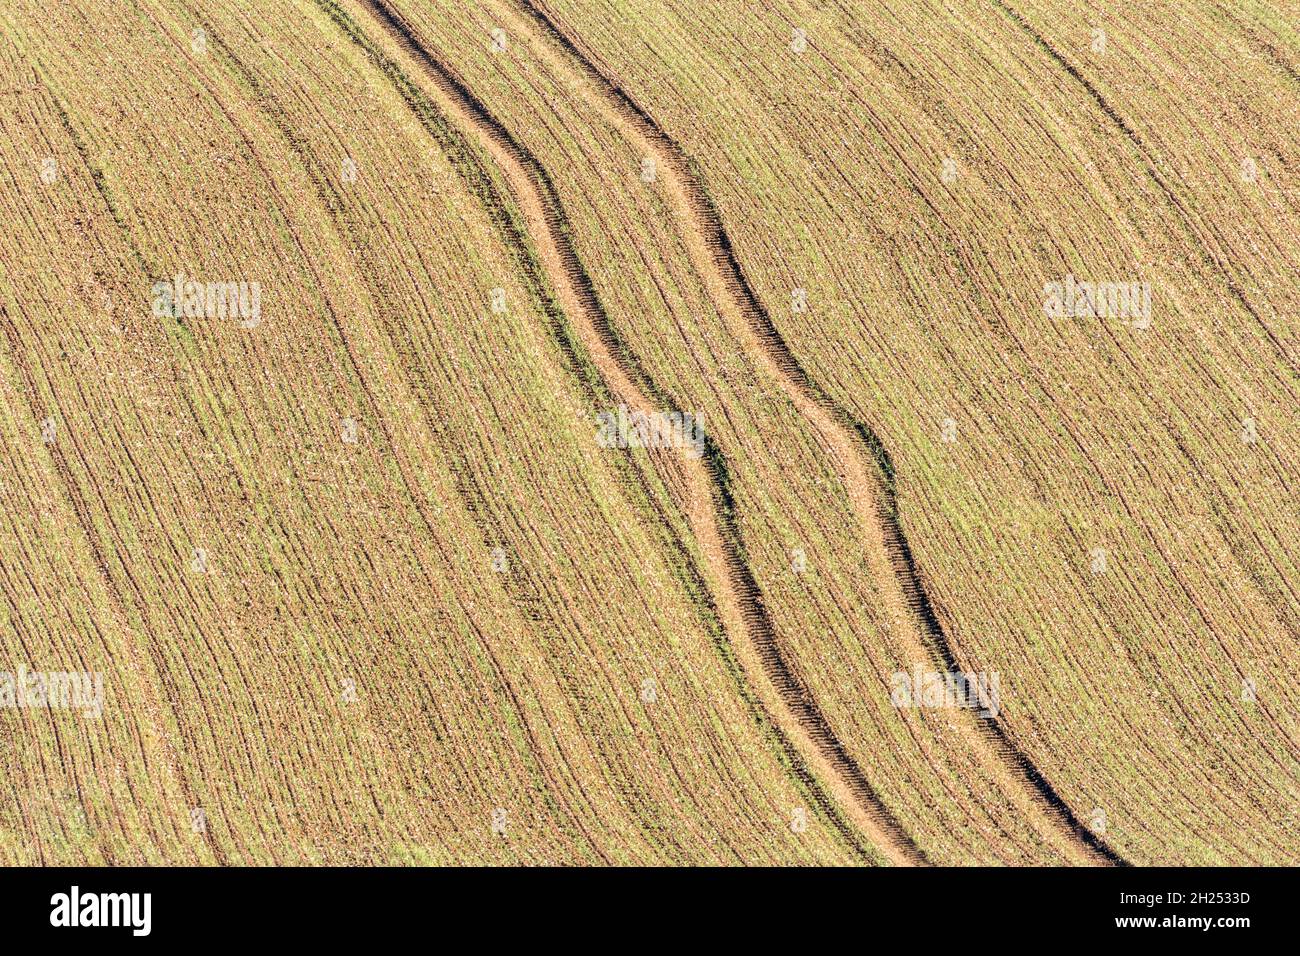 Slithering tractor track in field of a recently sown cereal crop. For British farming. Field crop pattern, farm tractor tracks, farm to fork metaphor. Stock Photo